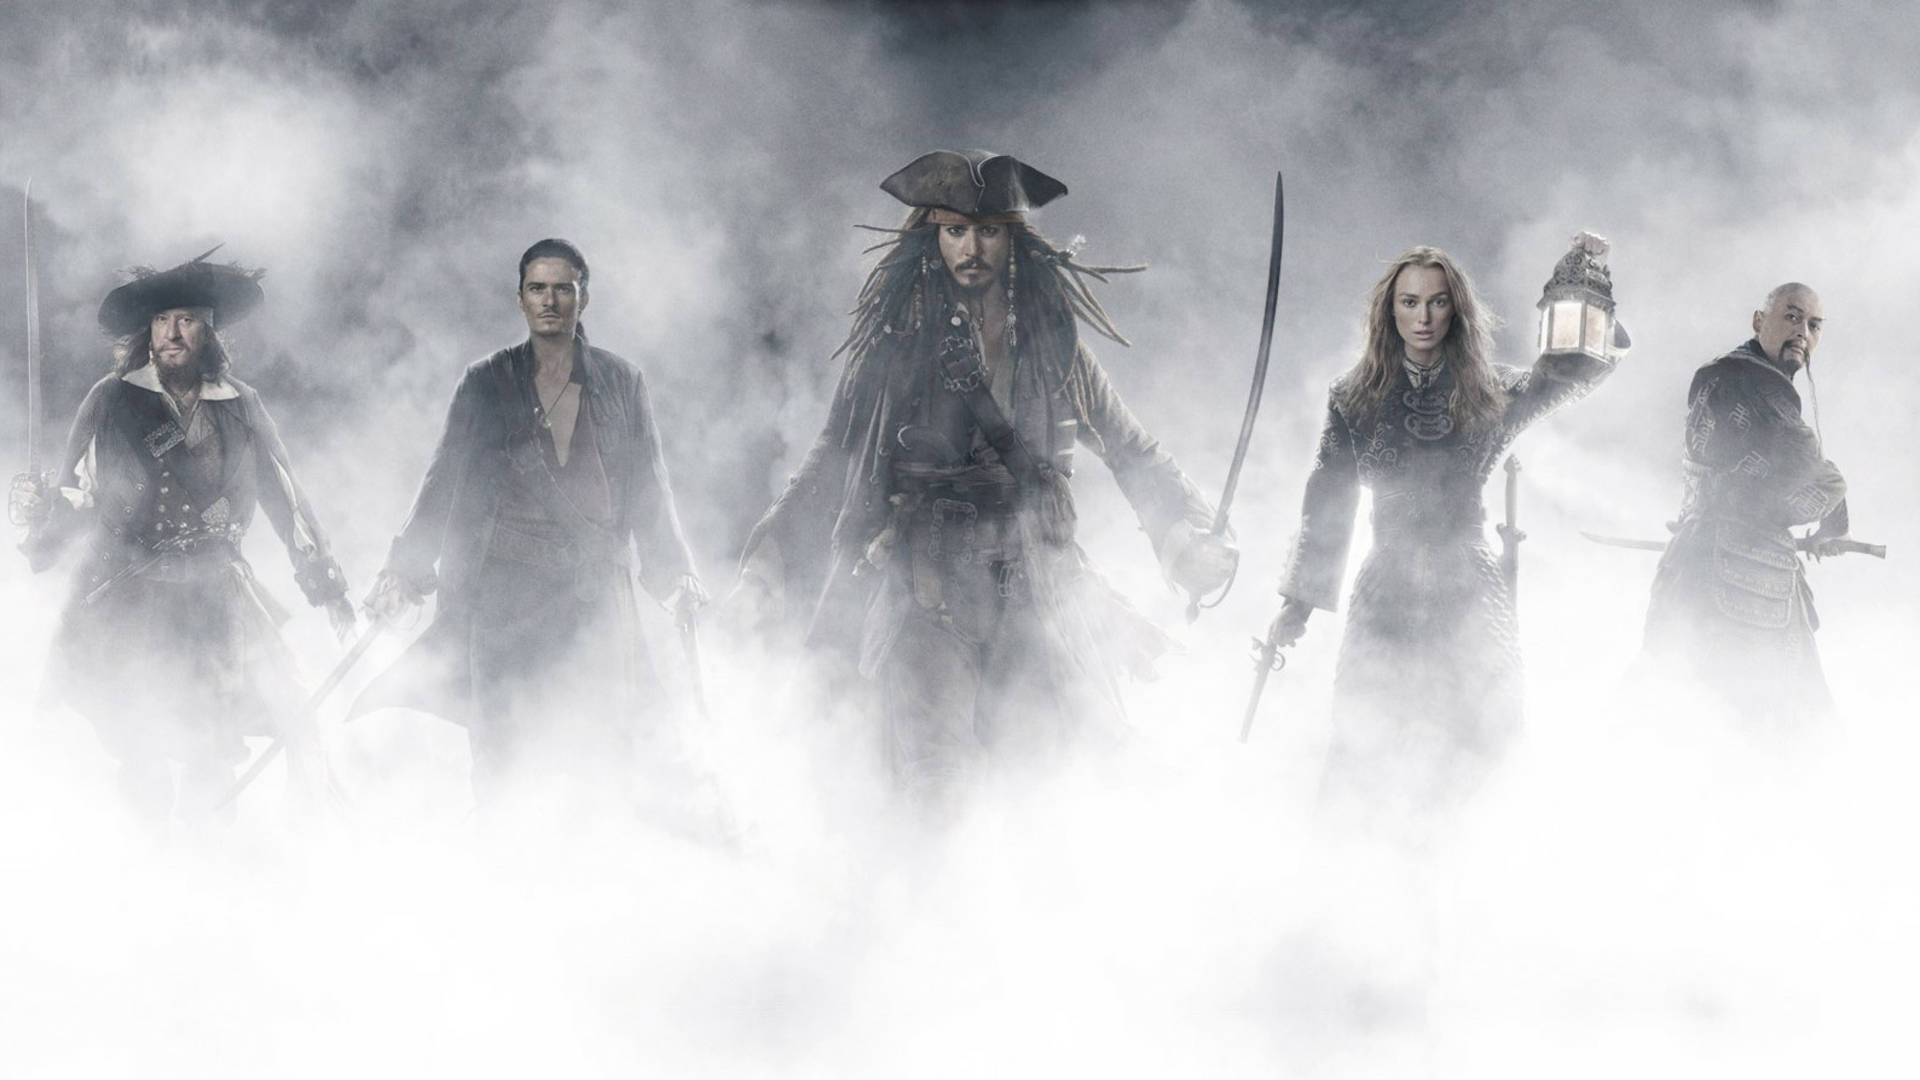 Caption: Iconic Pirates Of The Caribbean Cast